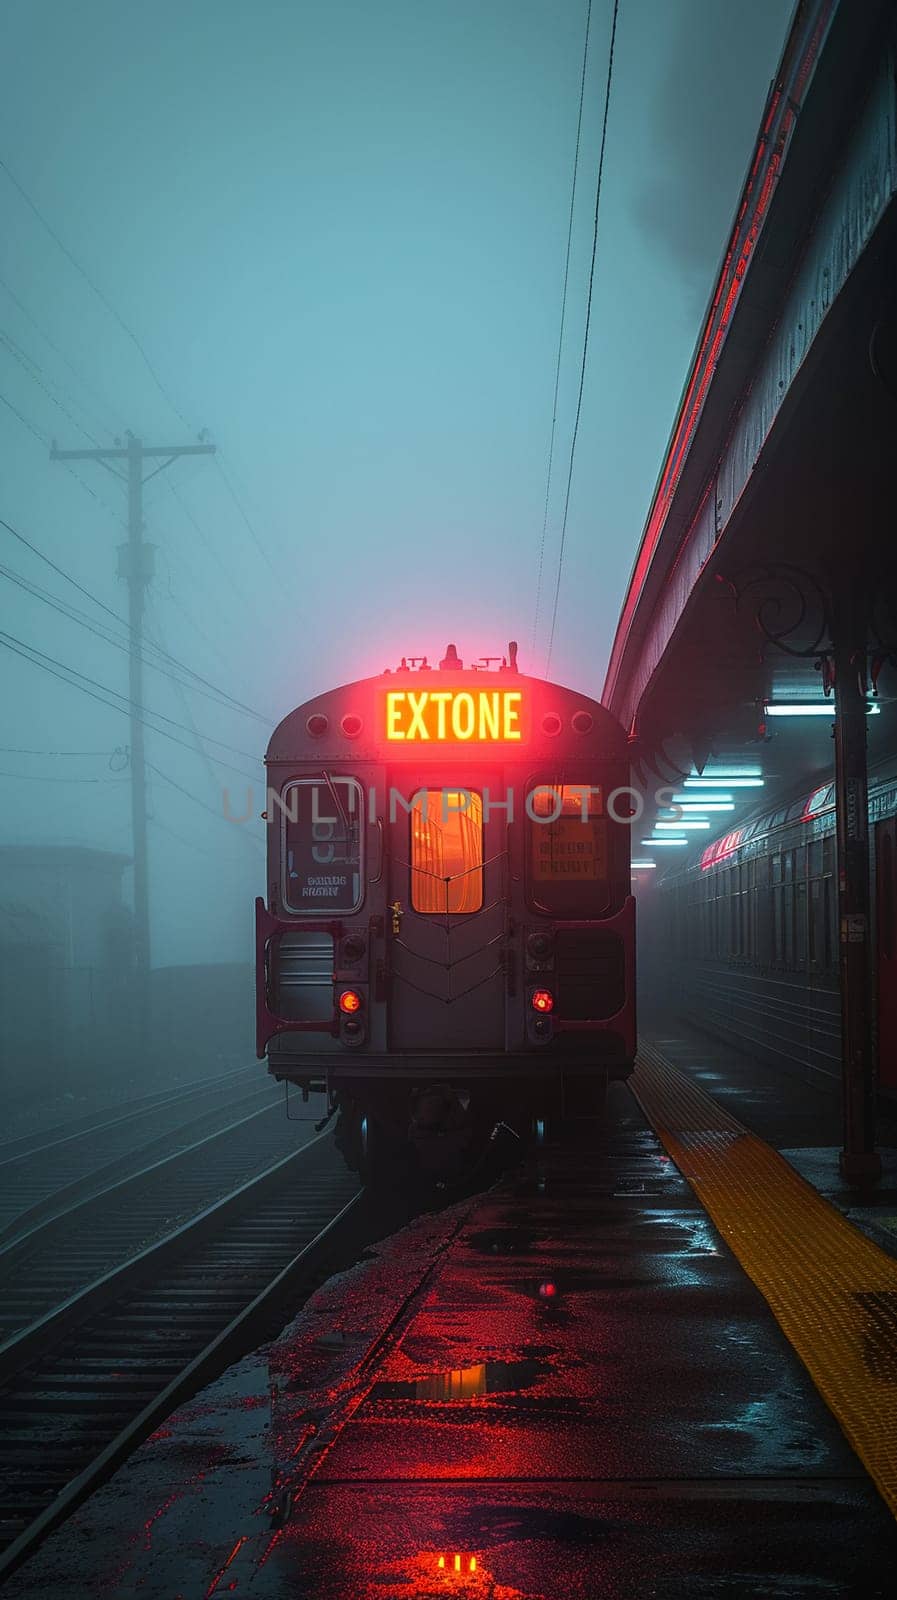 Vintage Train Car Waiting on Foggy Tracks at Dawn The steel blurs with the mist by Benzoix